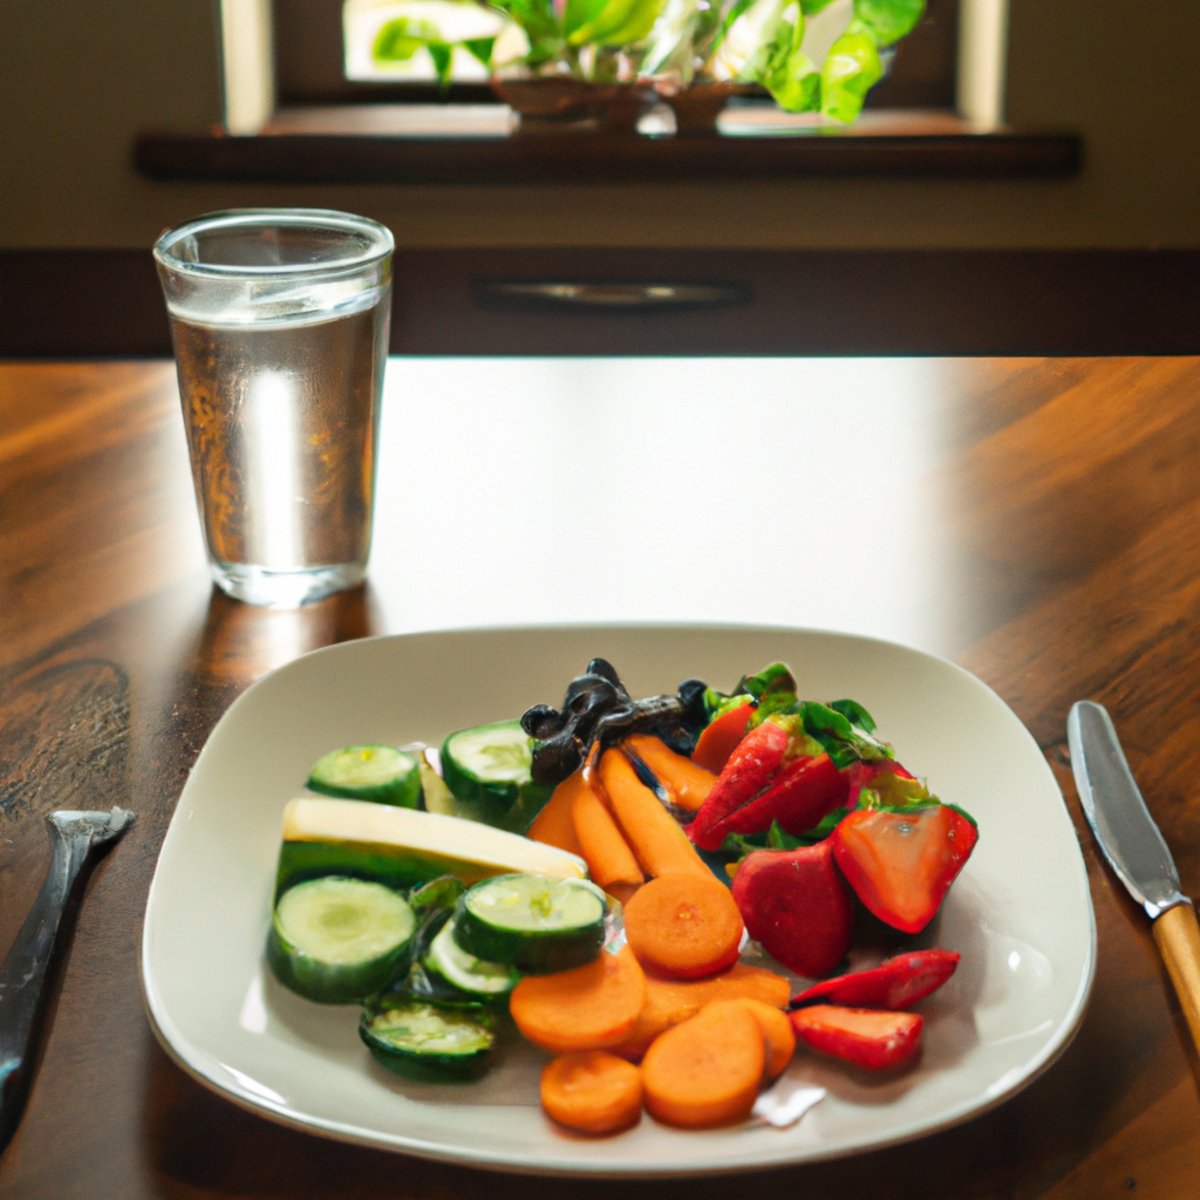 The photo shows a wooden table with a plate of food in the center. The plate contains a colorful assortment of fruits and vegetables, including sliced strawberries, blueberries, carrots, and cucumbers. A glass of water sits next to the plate, with a fork and knife placed neatly on either side. In the background, a window lets in natural light, casting a warm glow over the scene. The photo captures the essence of healthy eating and the benefits of intermittent fasting for boosting metabolism.